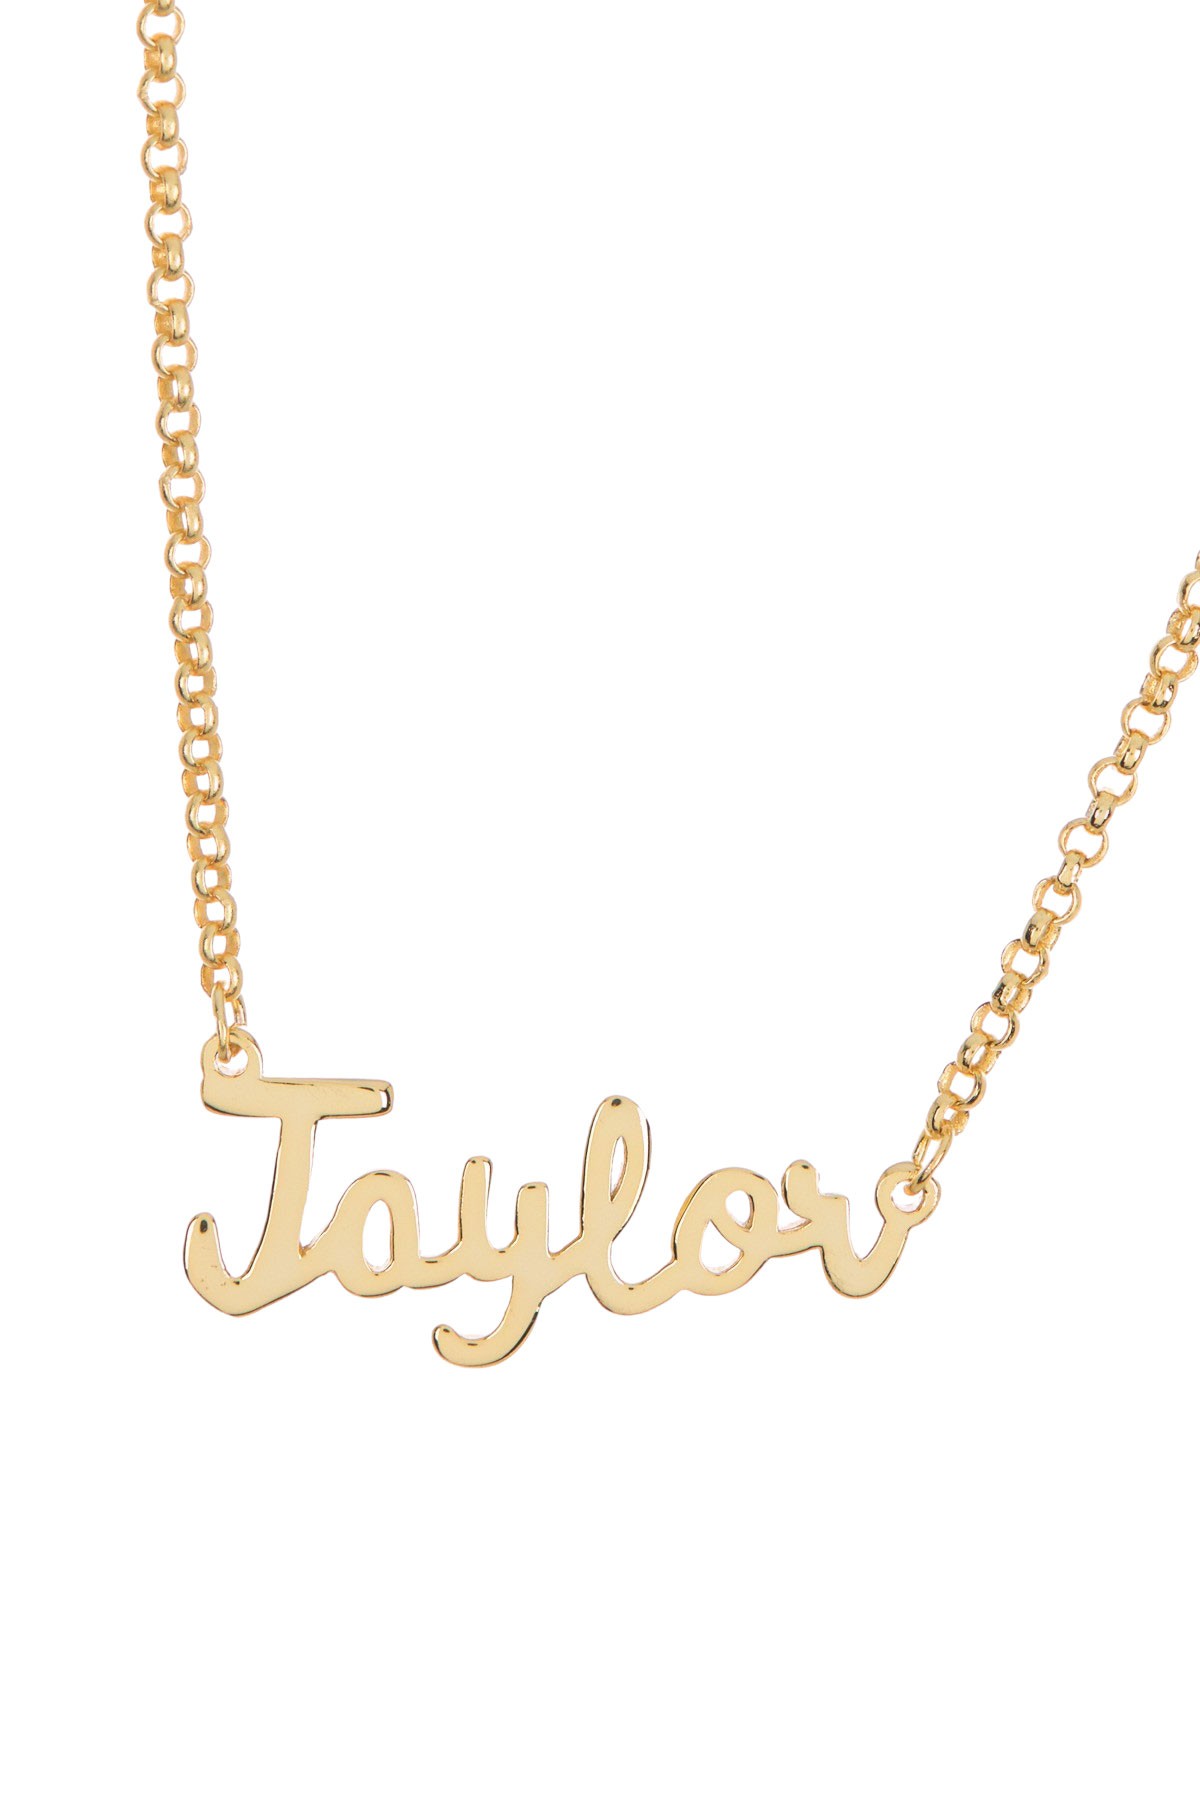 18K Yellow Gold Plated Sterling Silver 'Taylor' Name Pendant Necklace Argento Vivo